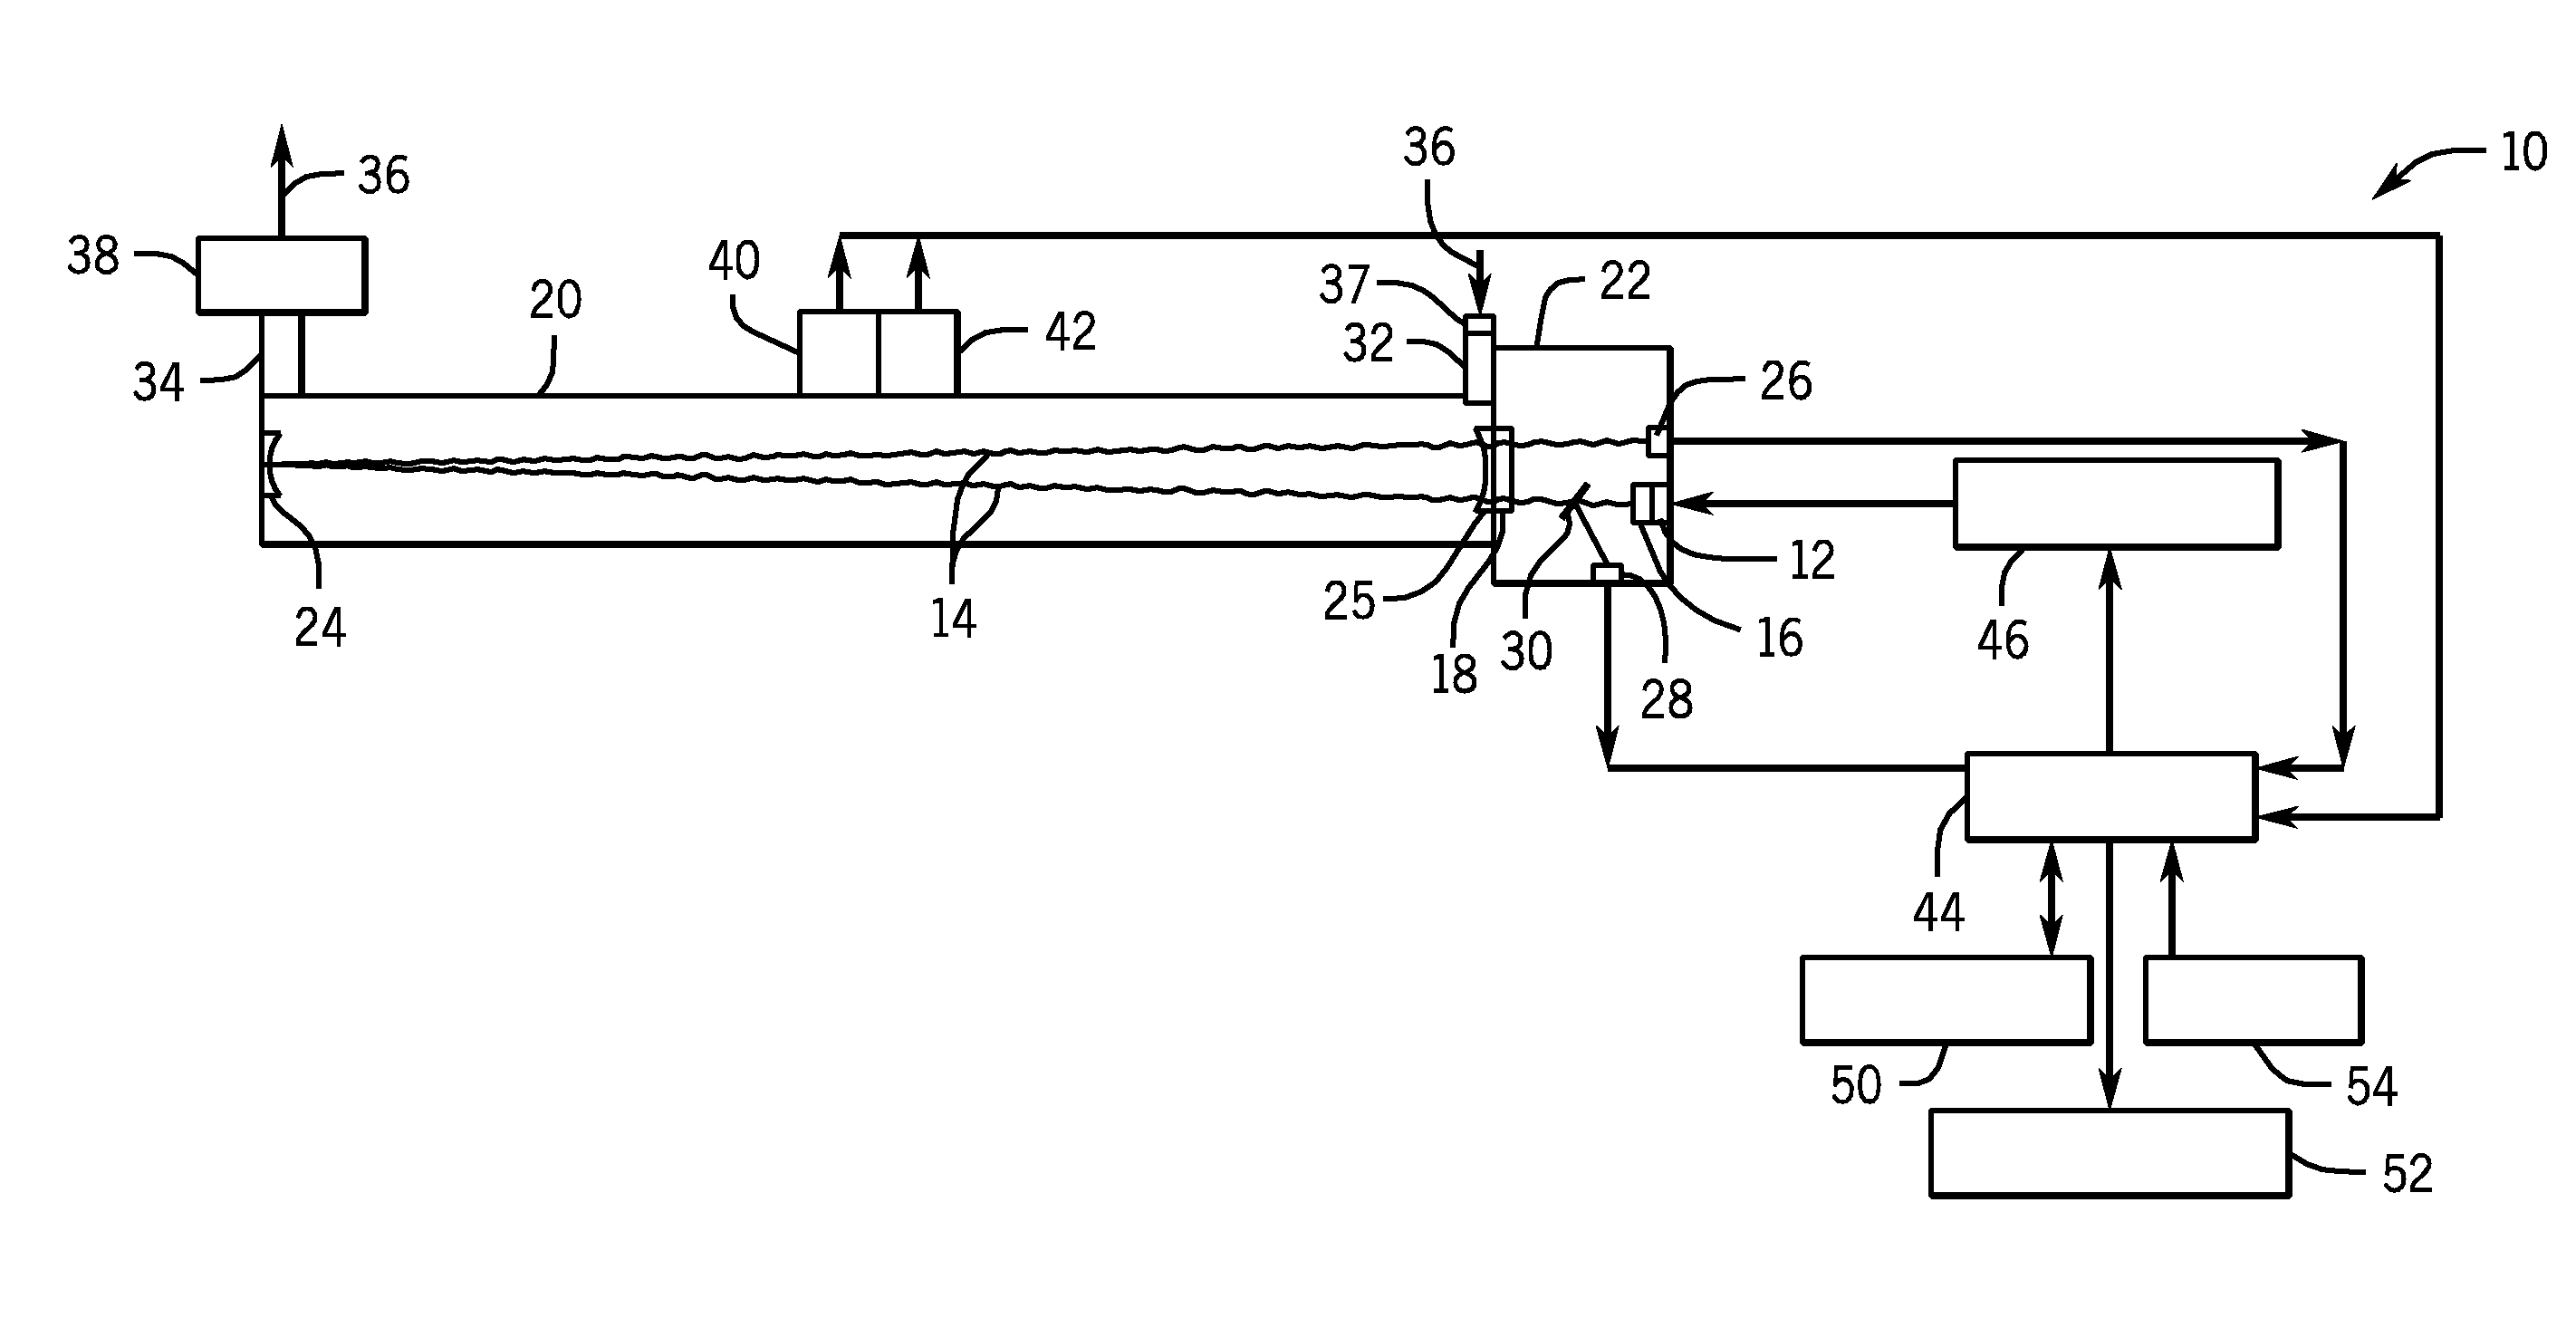 Method and system for detecting moisture in natural gas